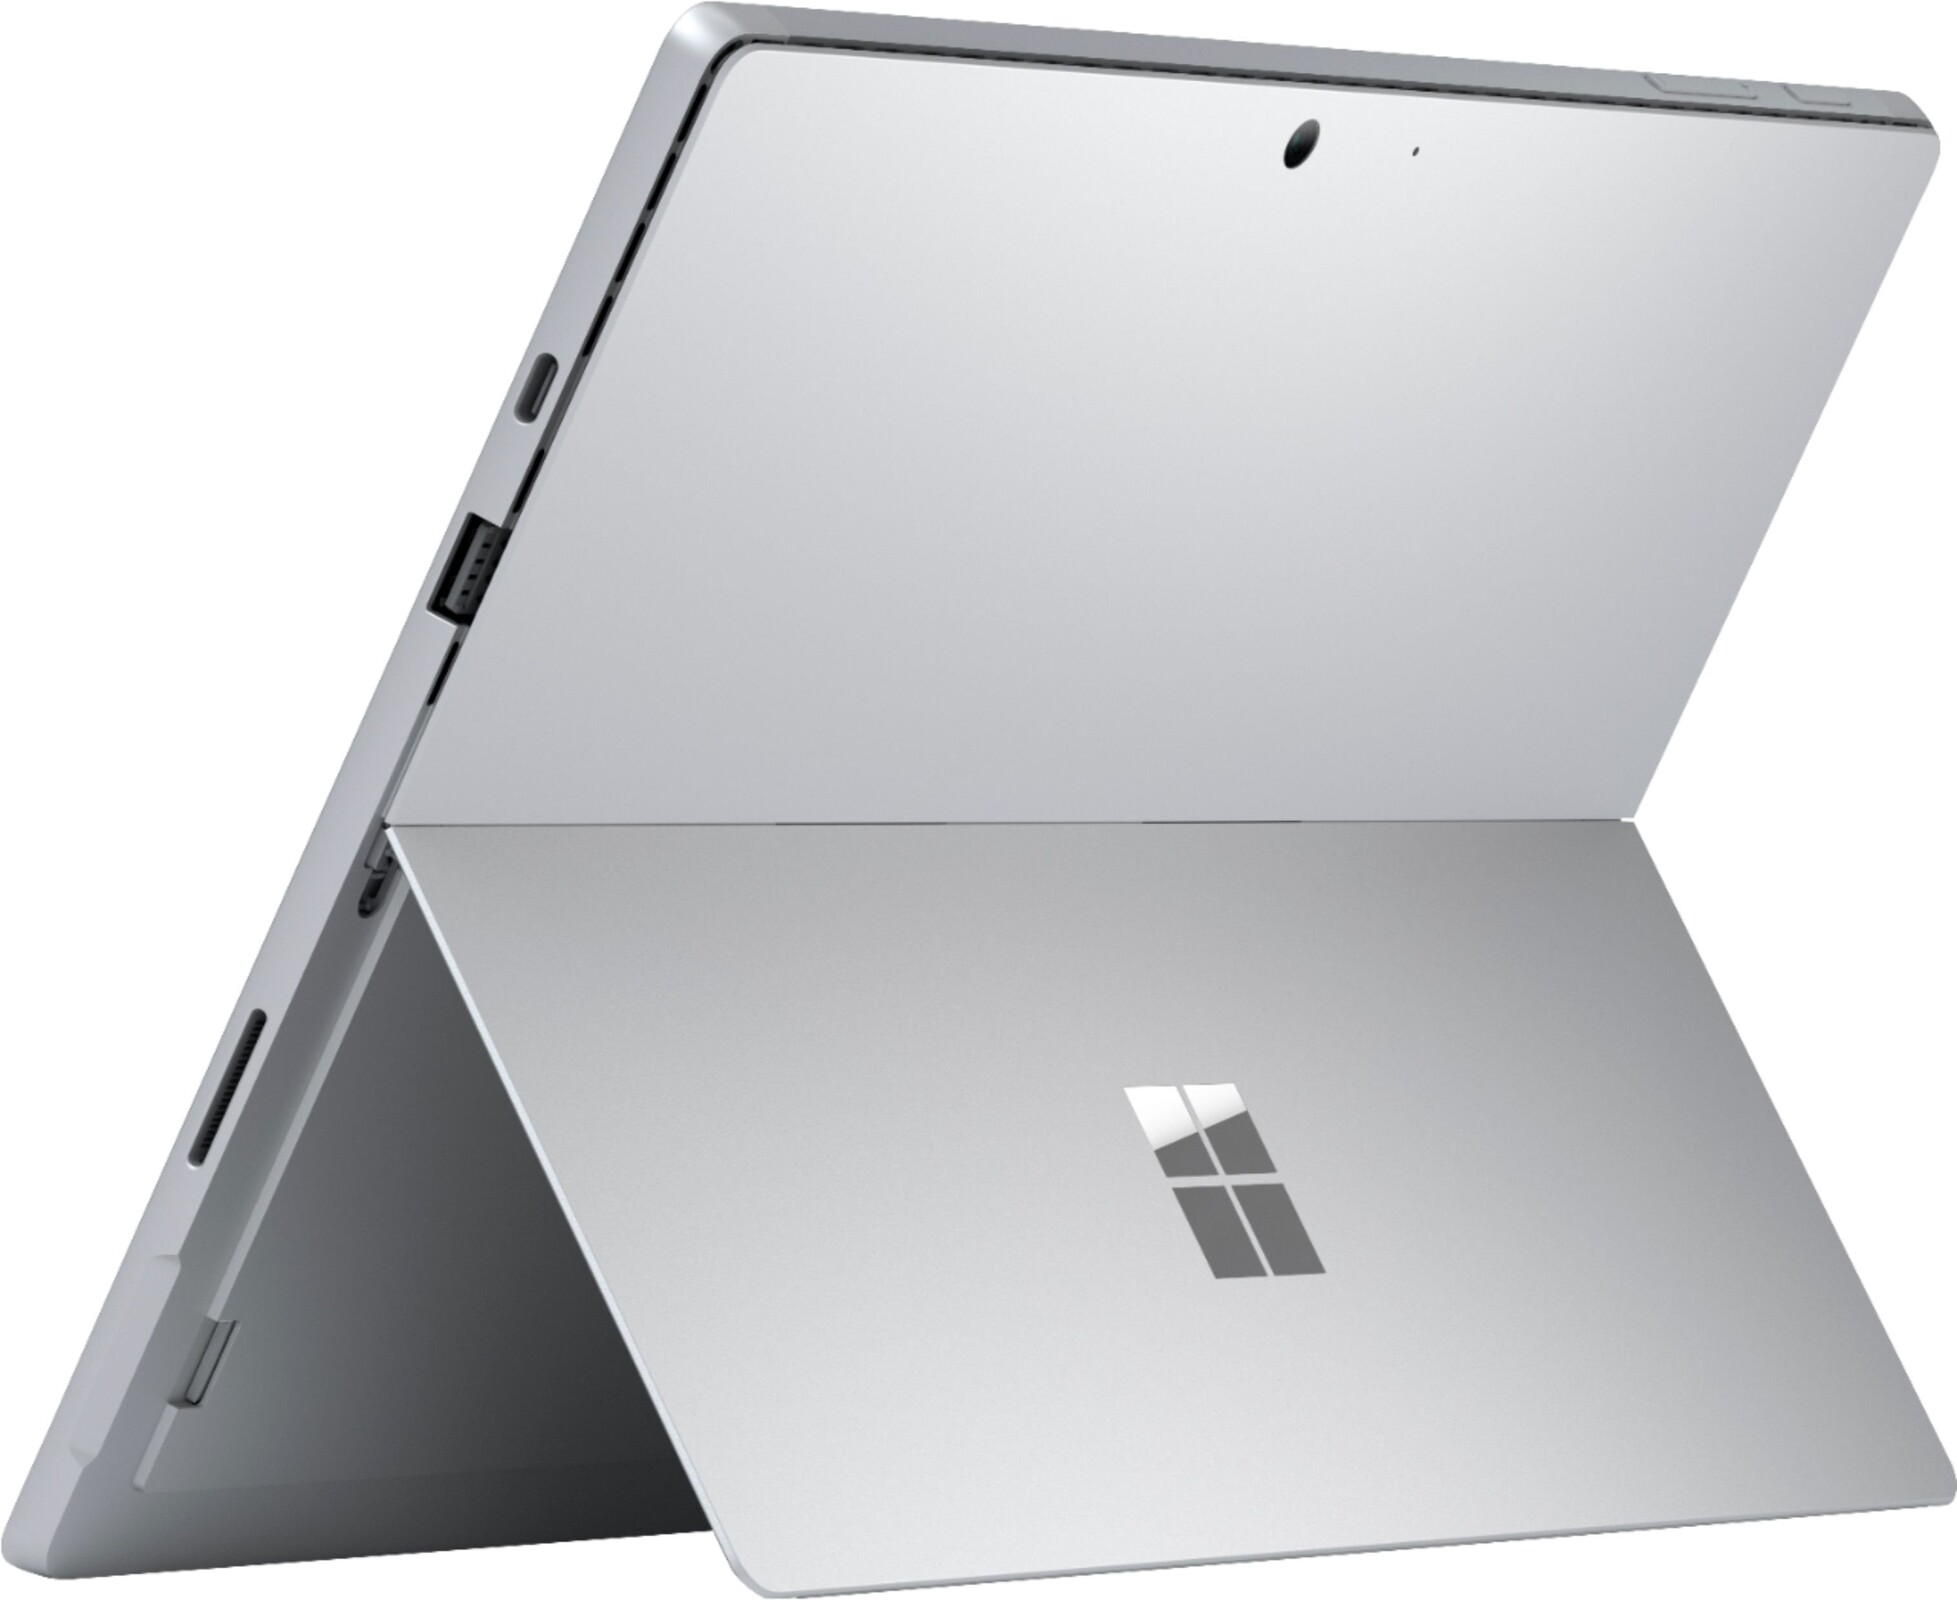 Surface Pro 7: Official marketing images leak ahead of tomorrow's